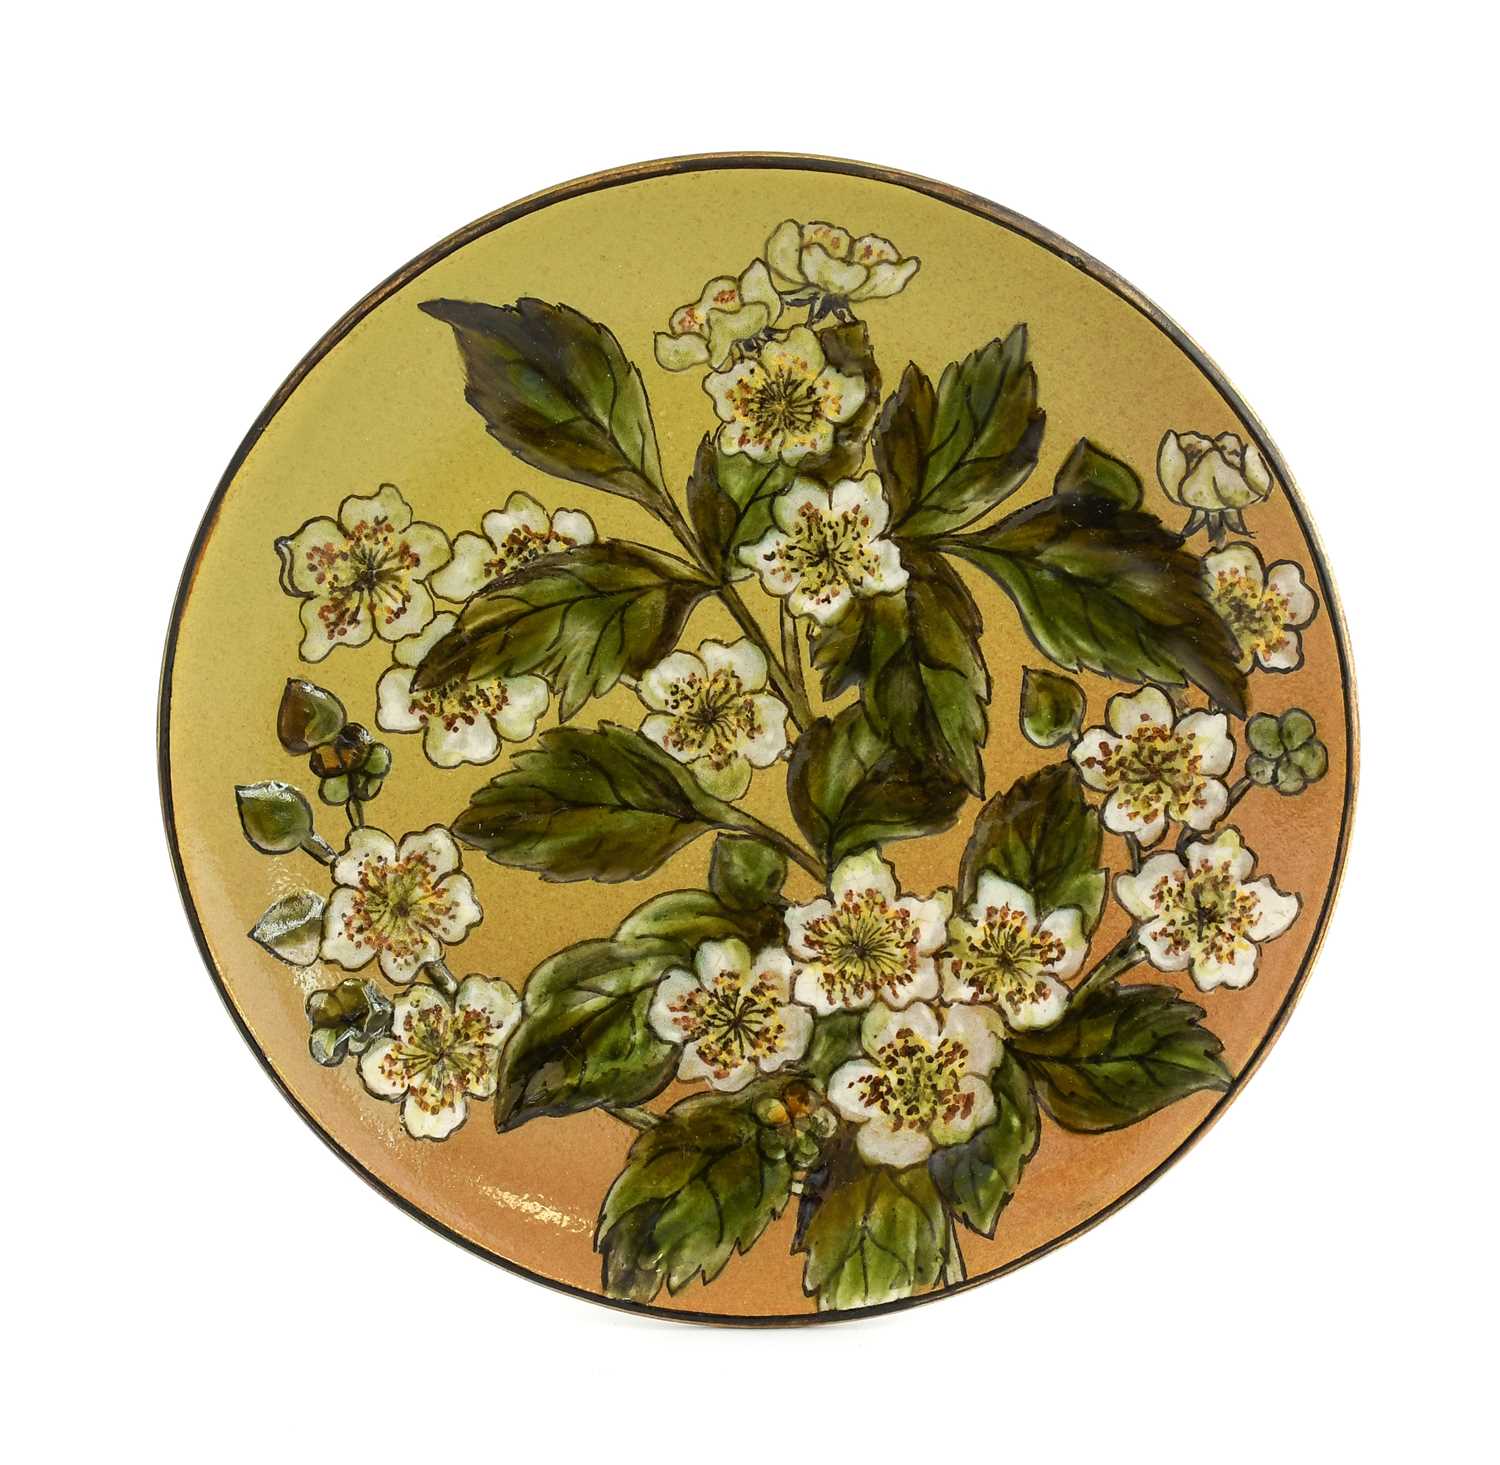 Christopher Dresser (Scottish, 1834-1904) for Linthorpe Pottery: A Dish, painted with fushsias, - Image 9 of 22